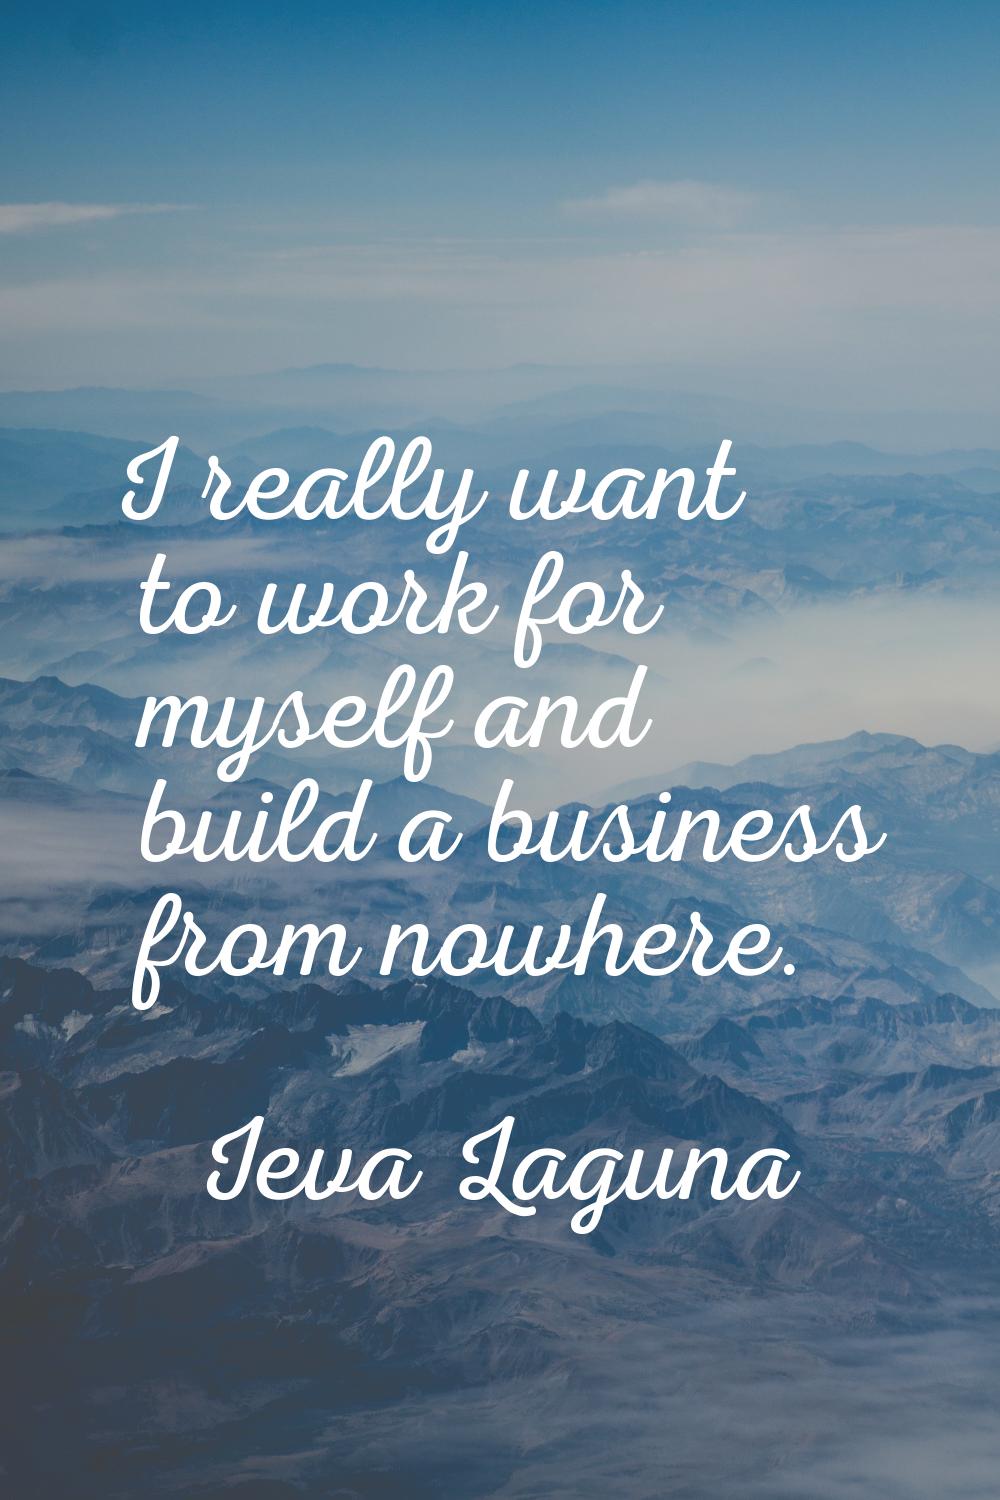 I really want to work for myself and build a business from nowhere.